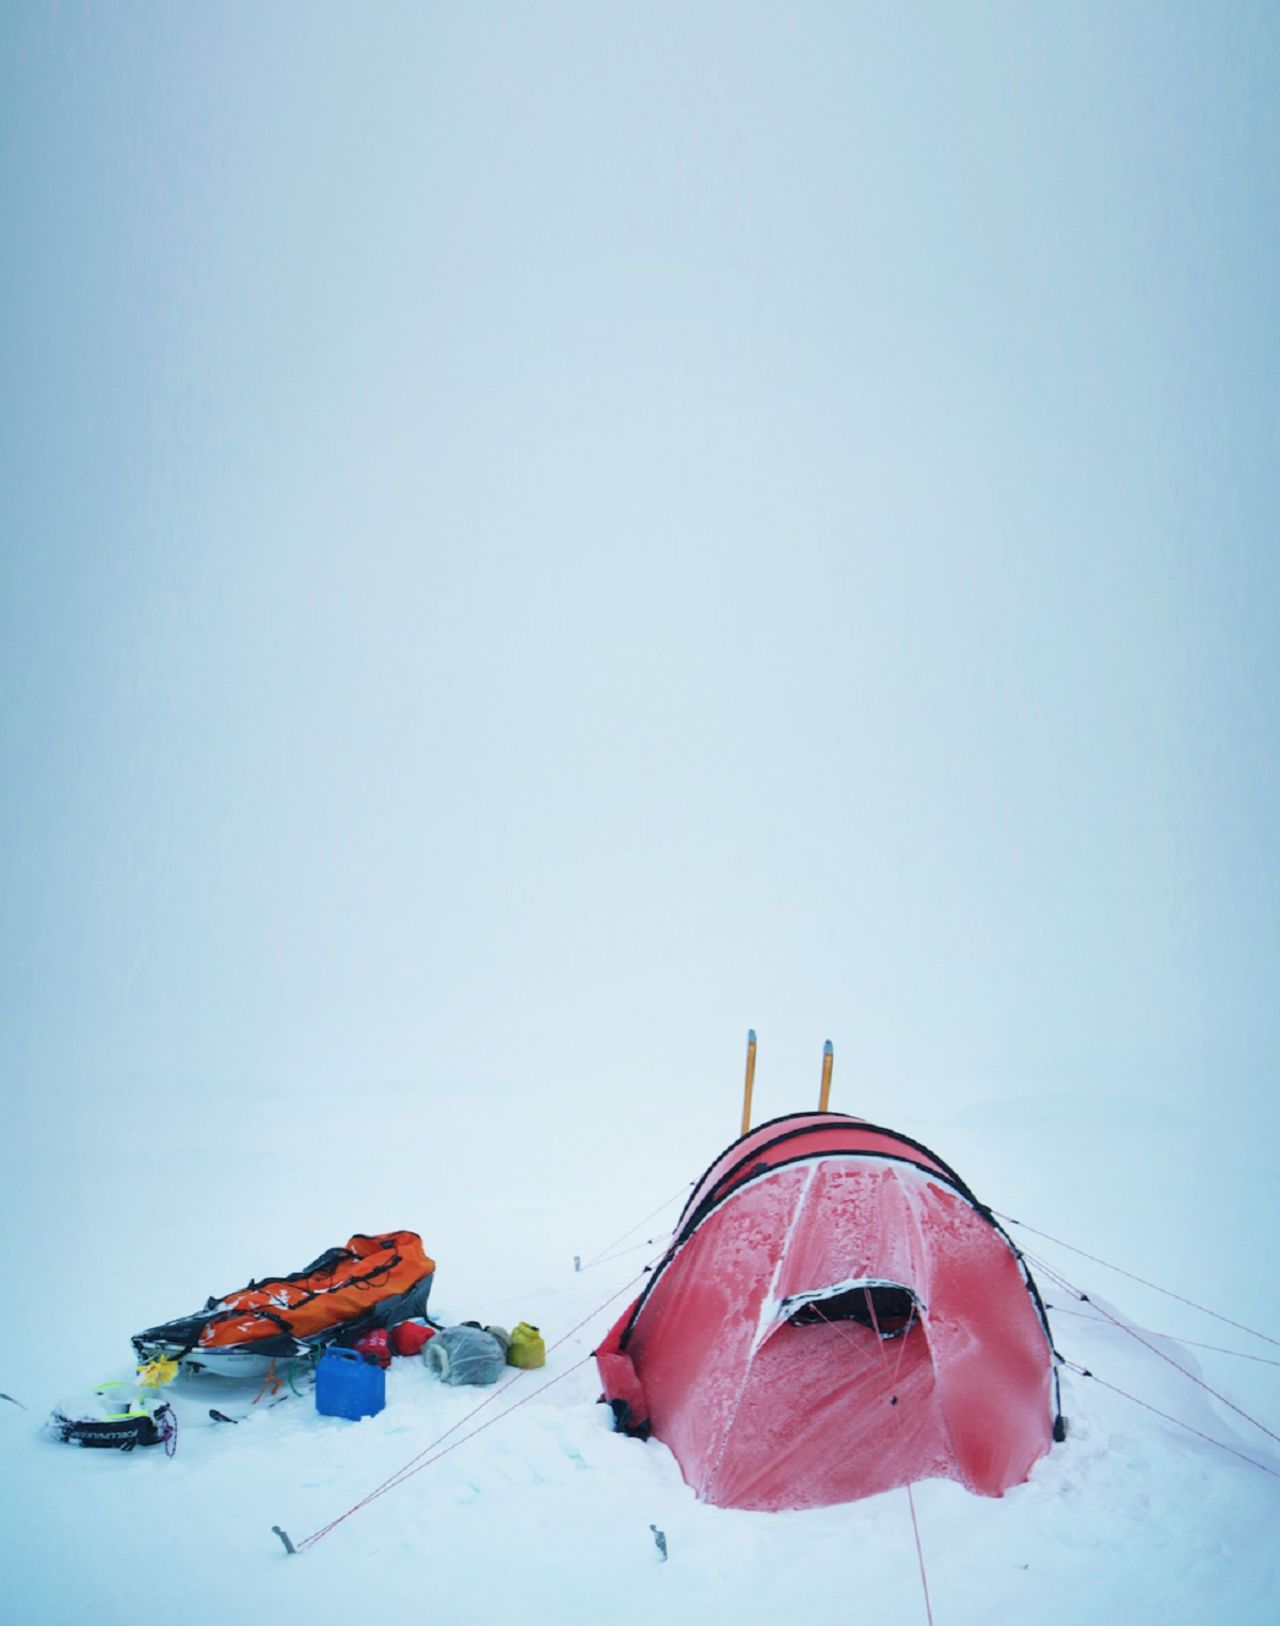 Davidsson's tent and sled set up on Antarctica during her 2016 trip to the South Pole. She says that the wind whipping the fabric of the tent was often the only sound she would hear in the isolated environment.